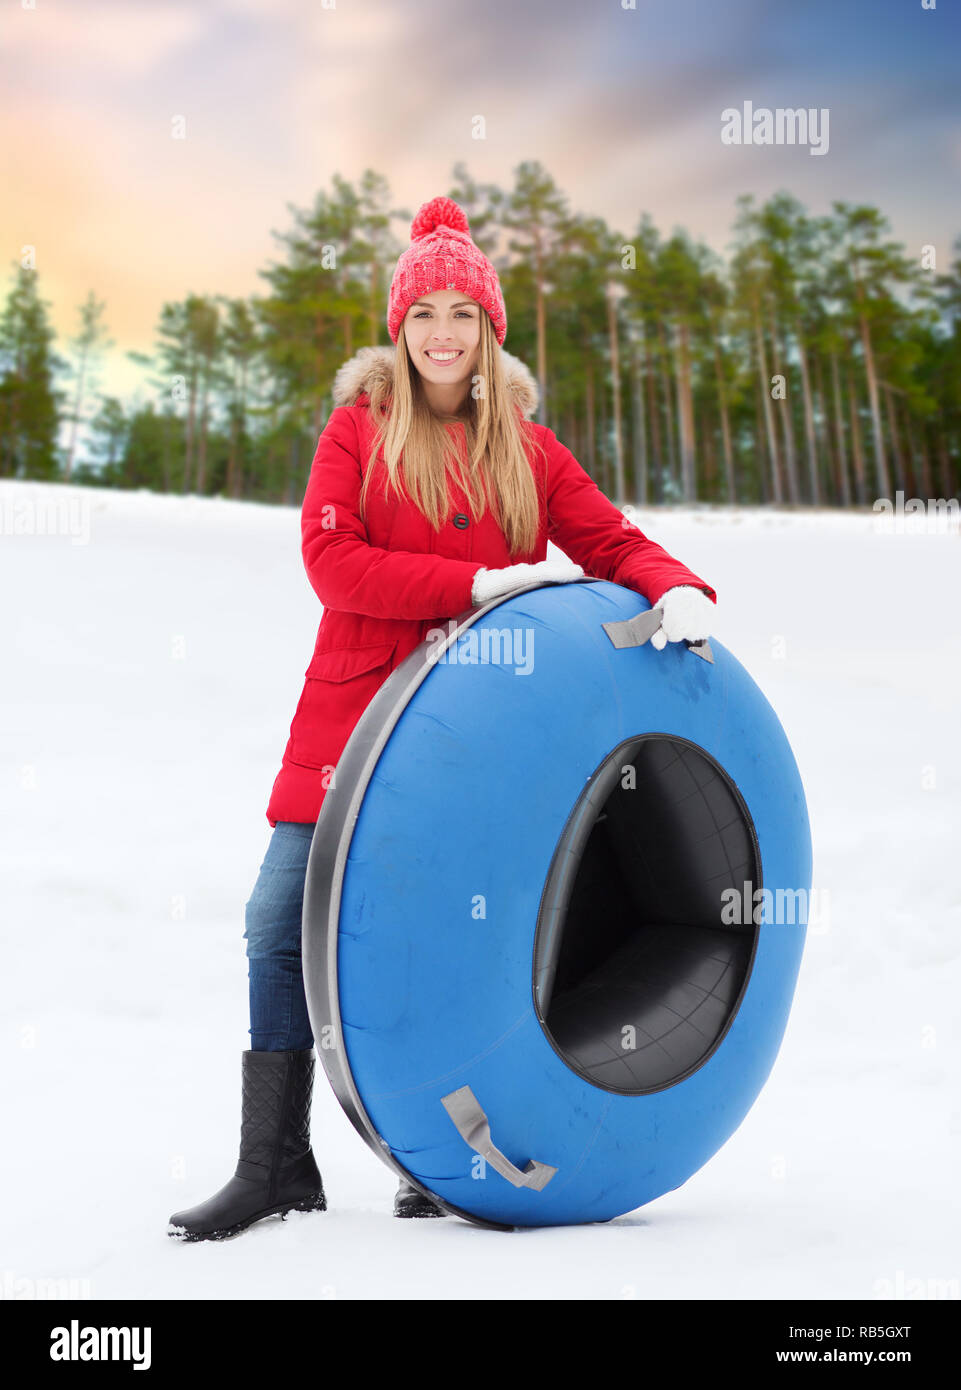 Teenage girl with snow tube en hiver Banque D'Images